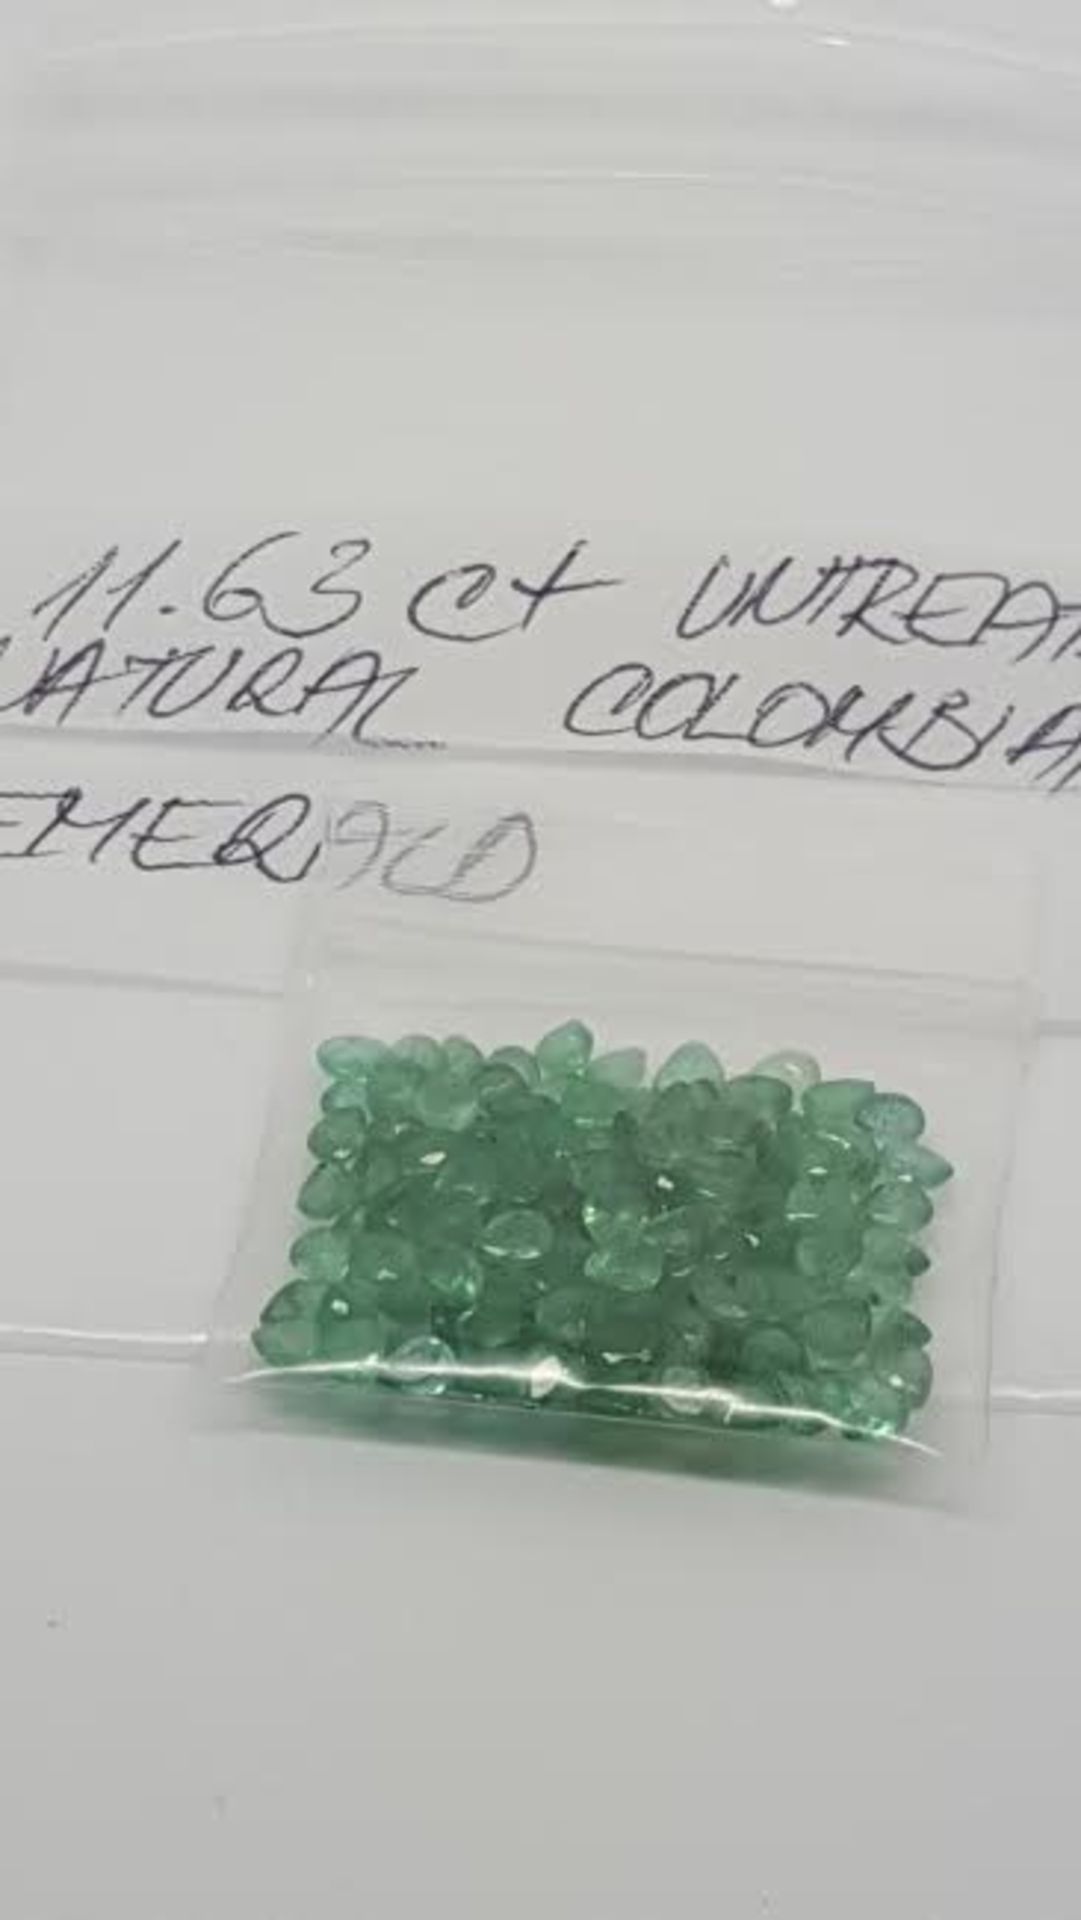 11.63 ct natural loose unheated emeralds - Image 2 of 2